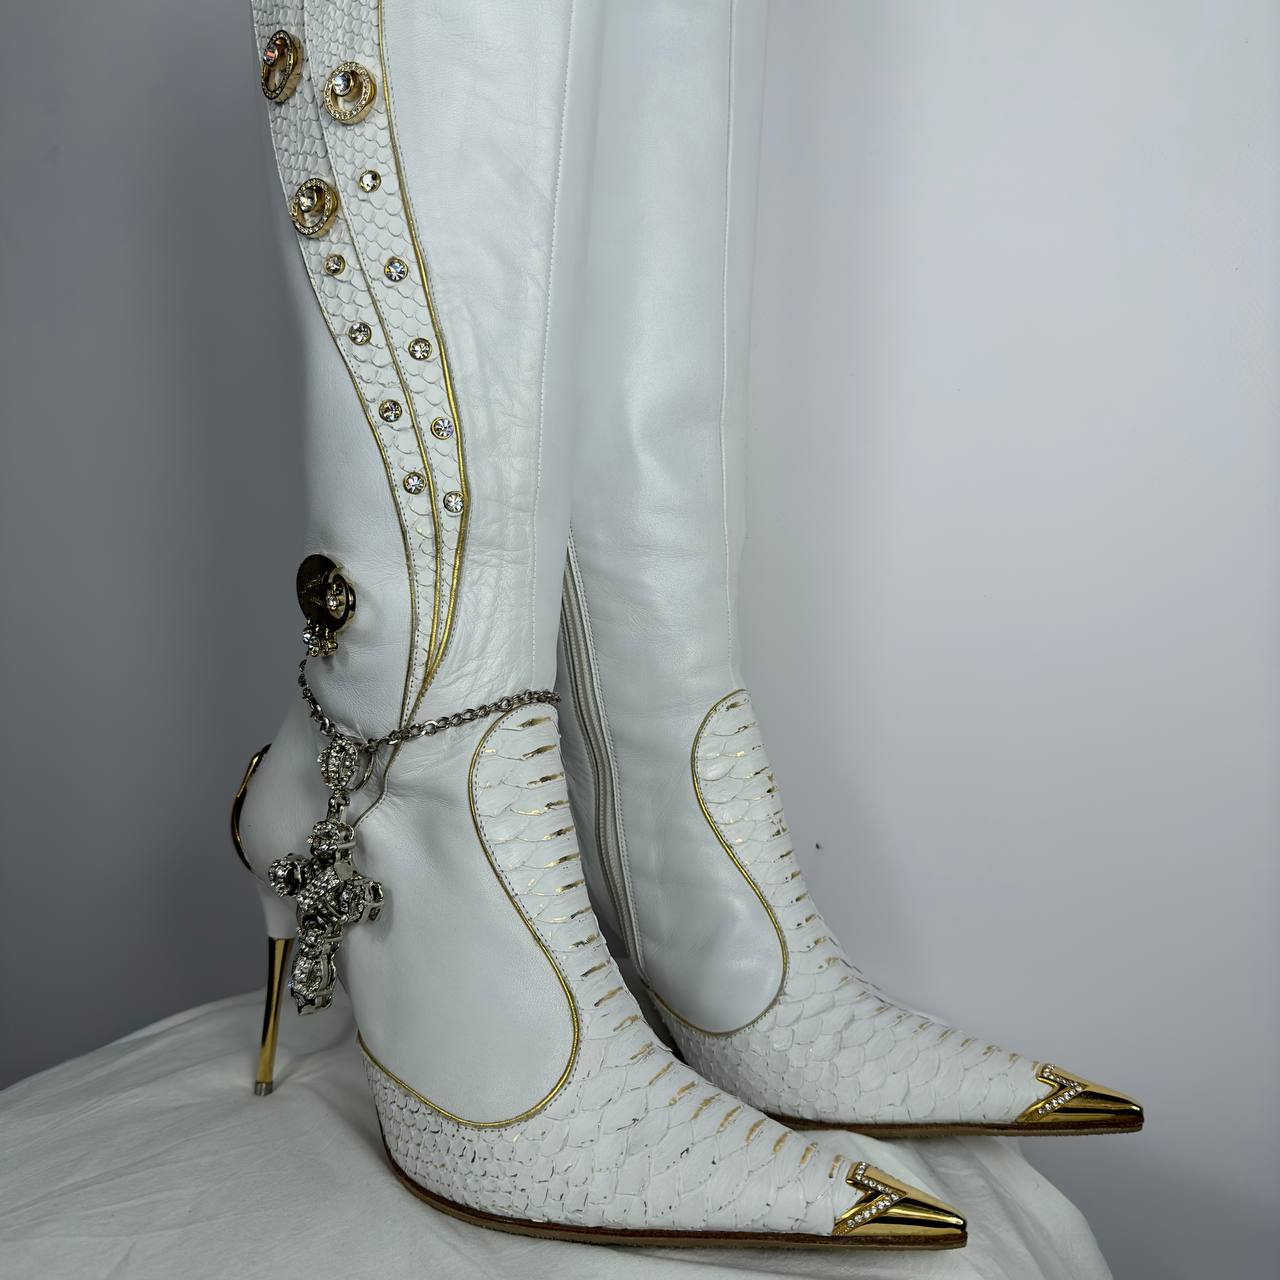 Hamlet Couture Italian Python Leather Boots 37.5/38.5